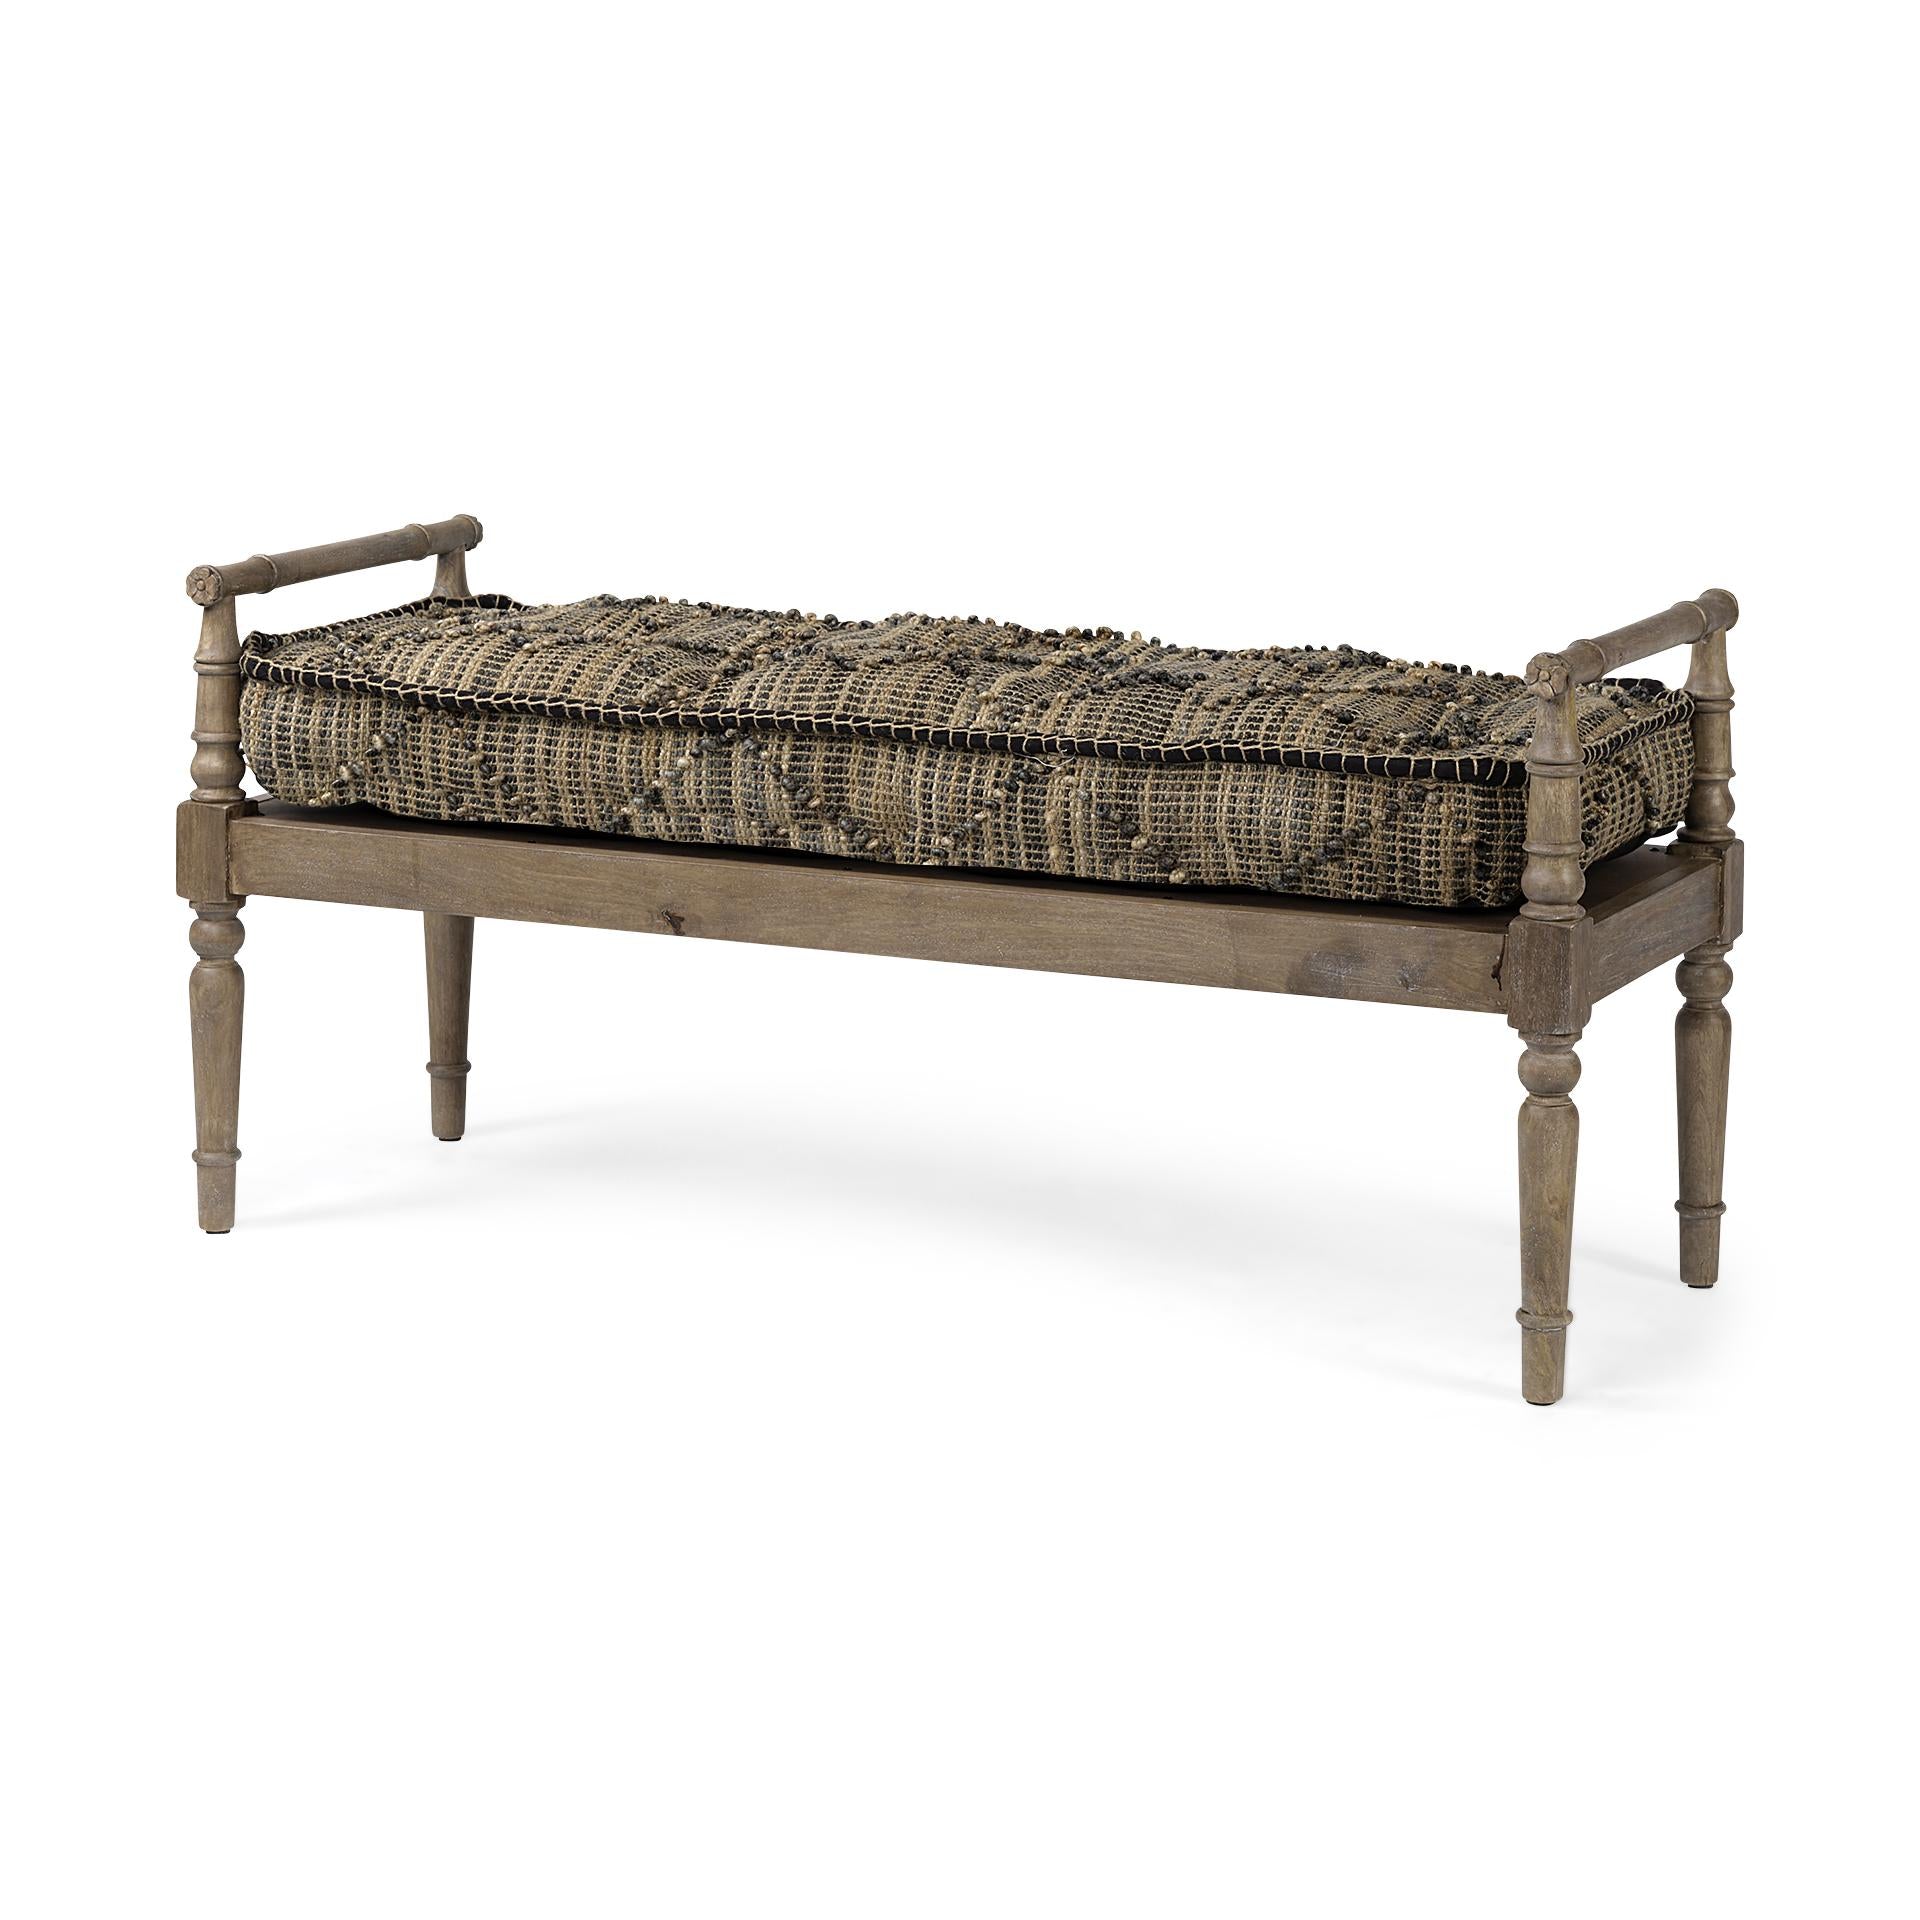 Rectangular Indian Mango WoodLight Brown And Grey W Jute Patterned Top Accent Bench